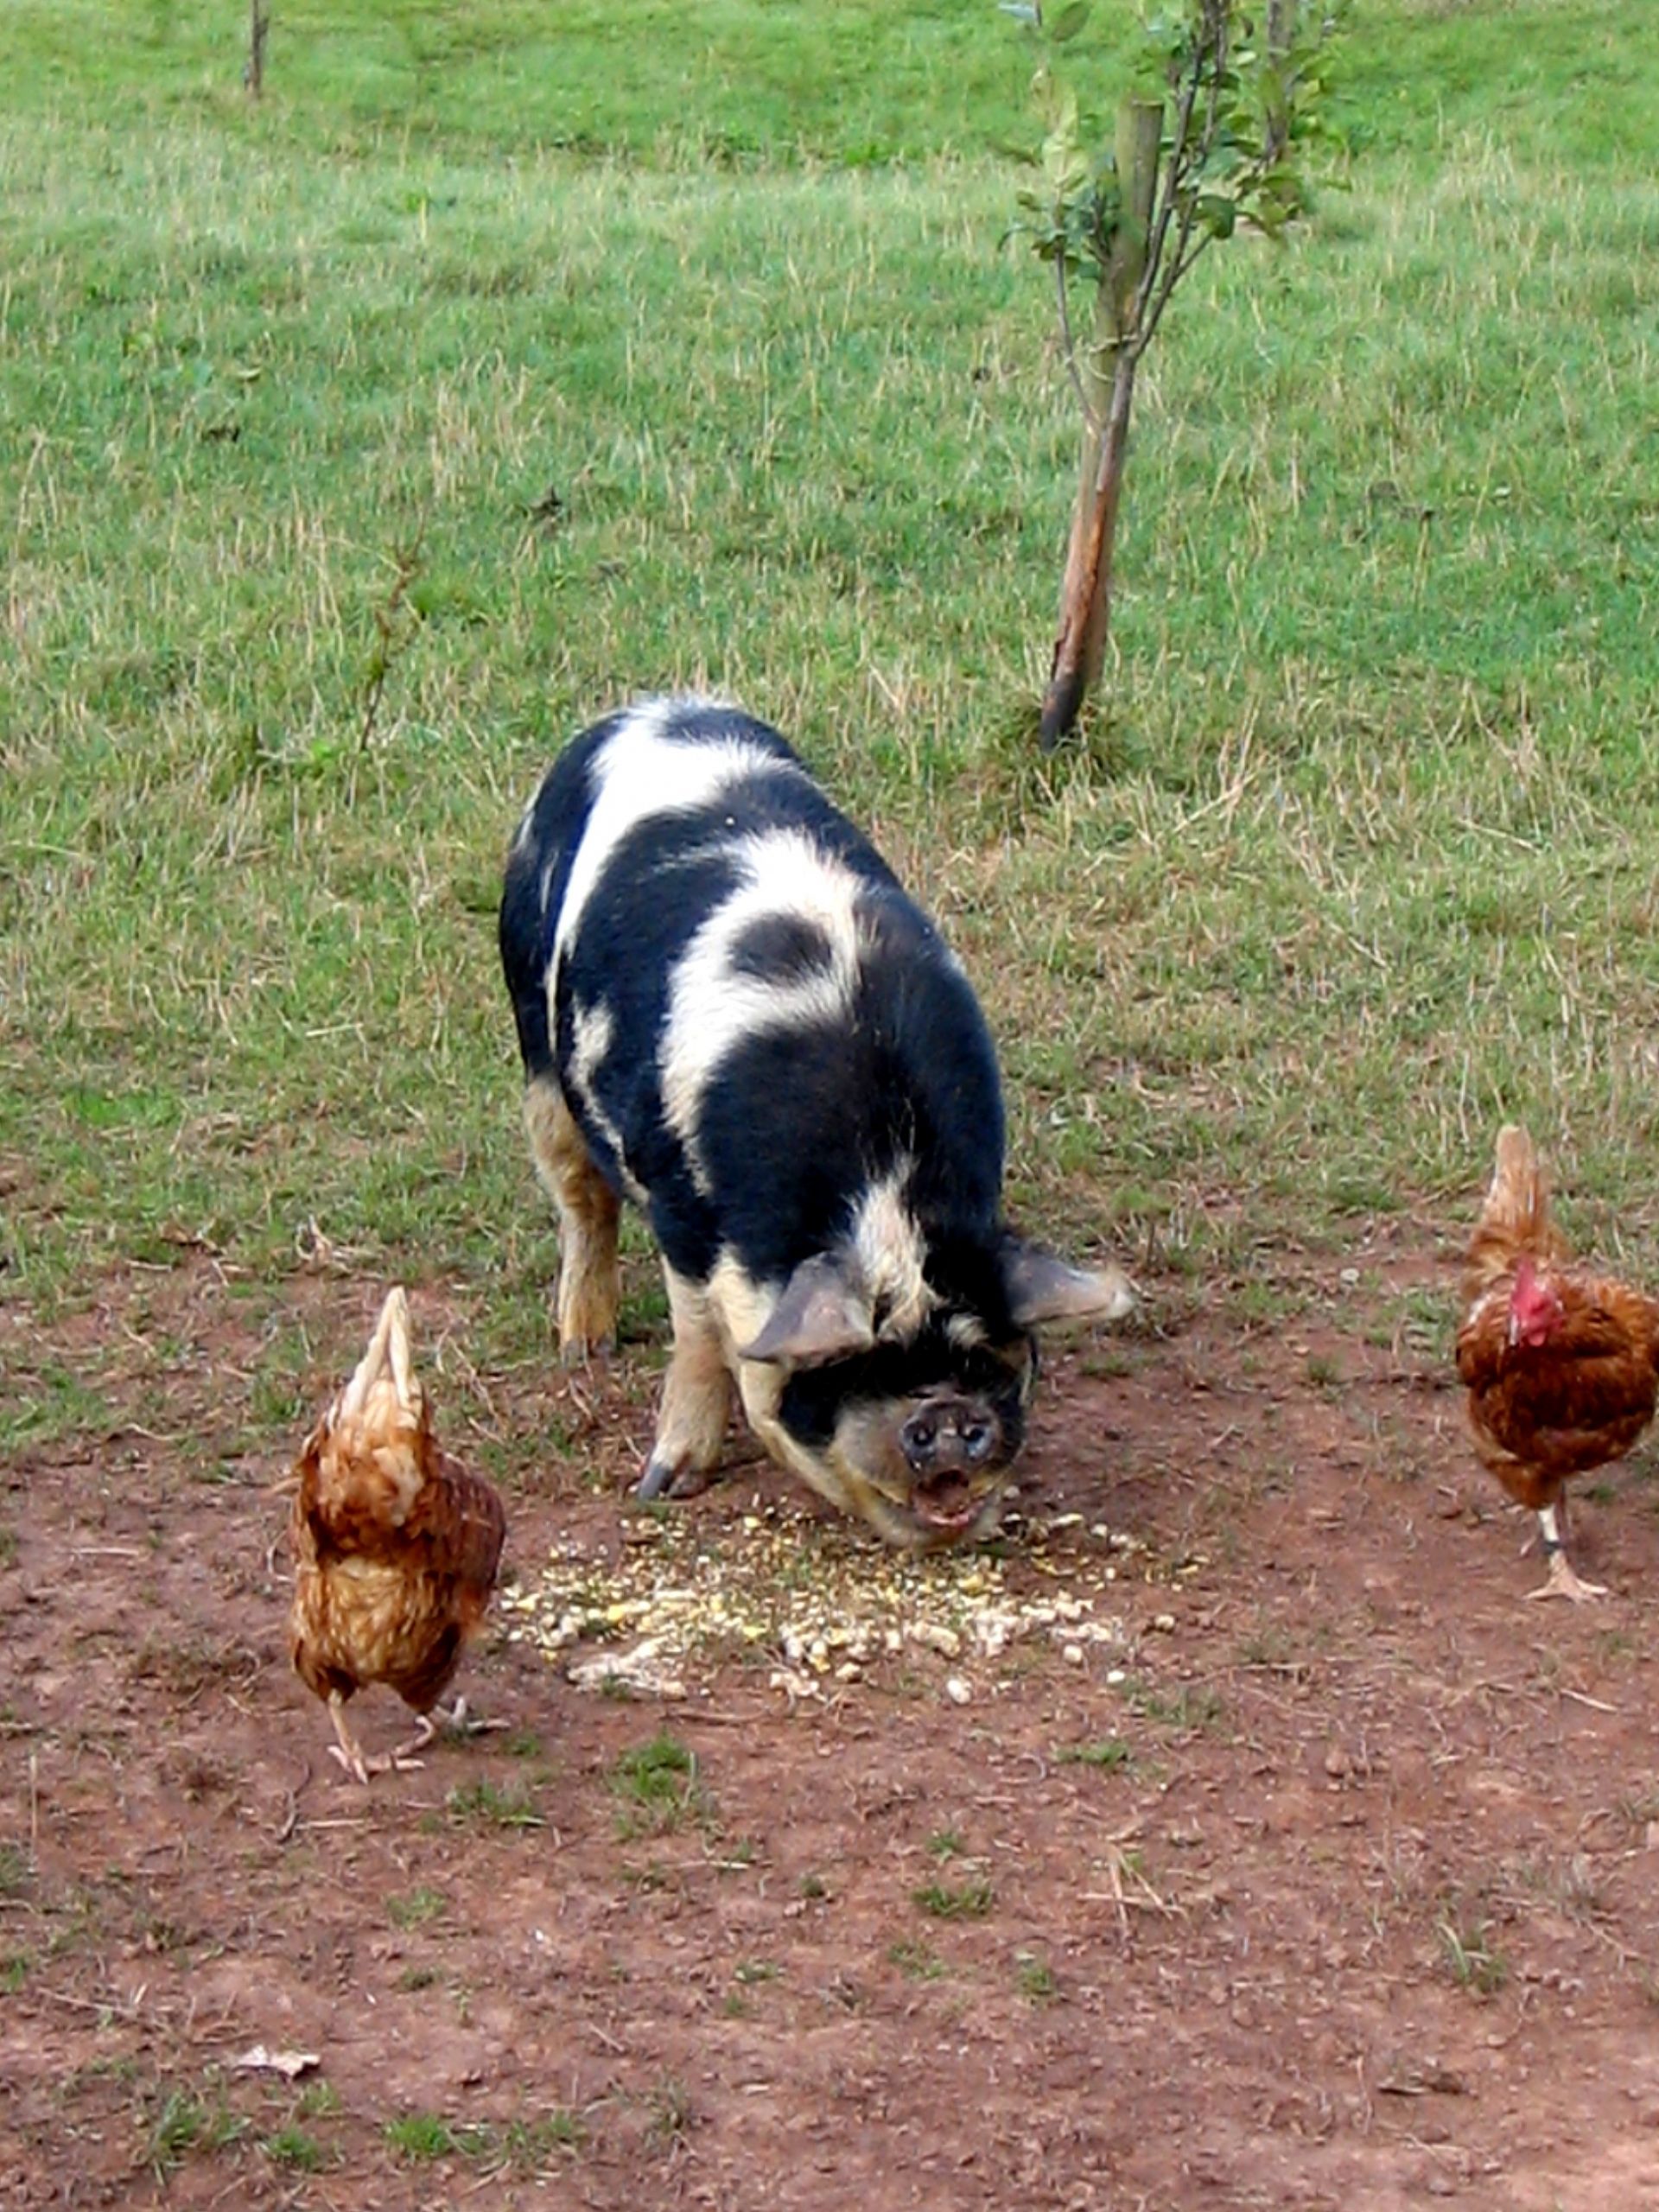 Pig and chickens